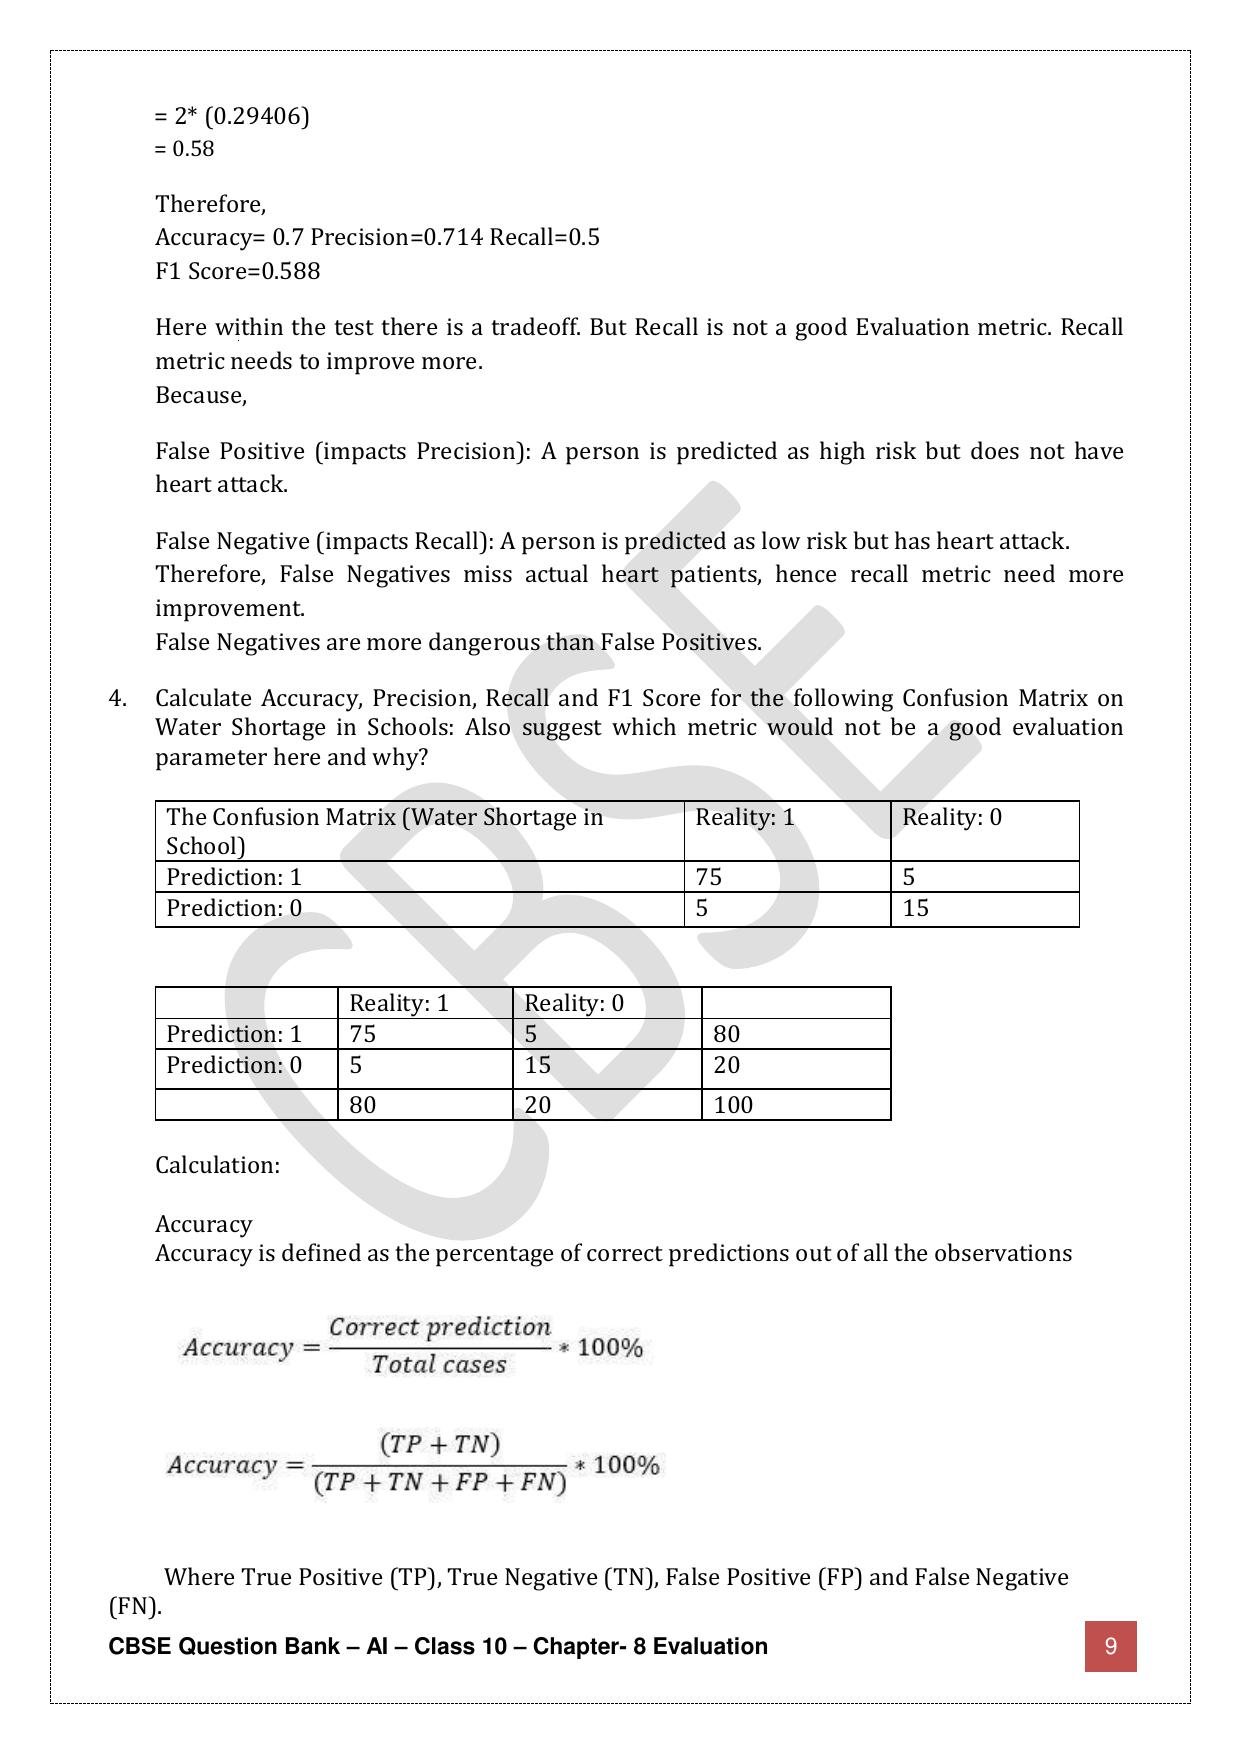 CBSE Class 10 Artificial Intelligence - Chapter 8 Question Bank - Page 9